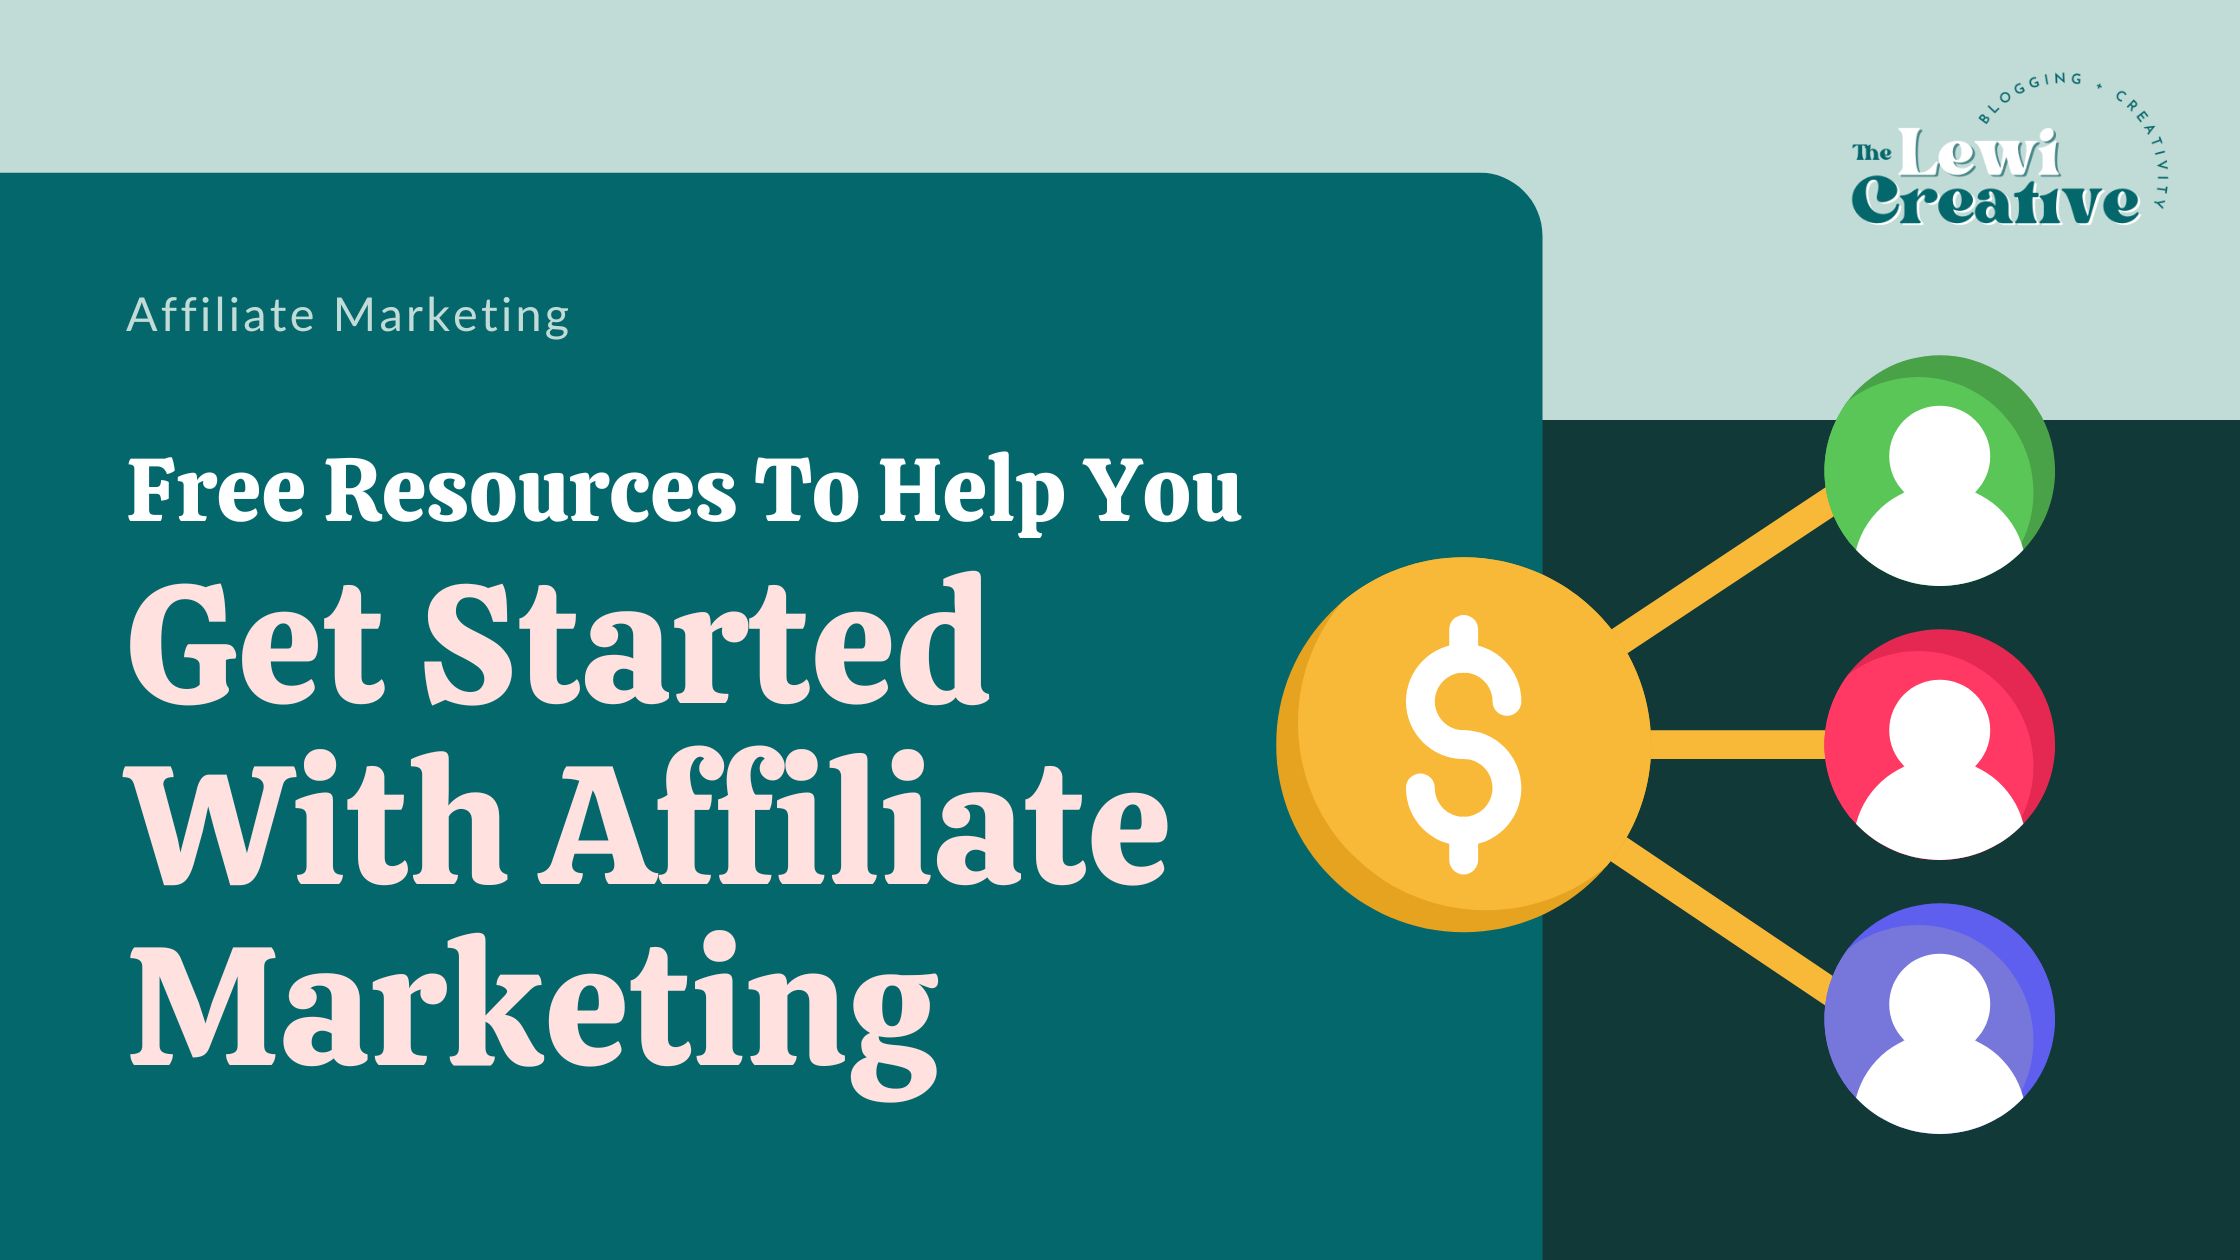 free resources to help you get started with affiliate marketing as a business